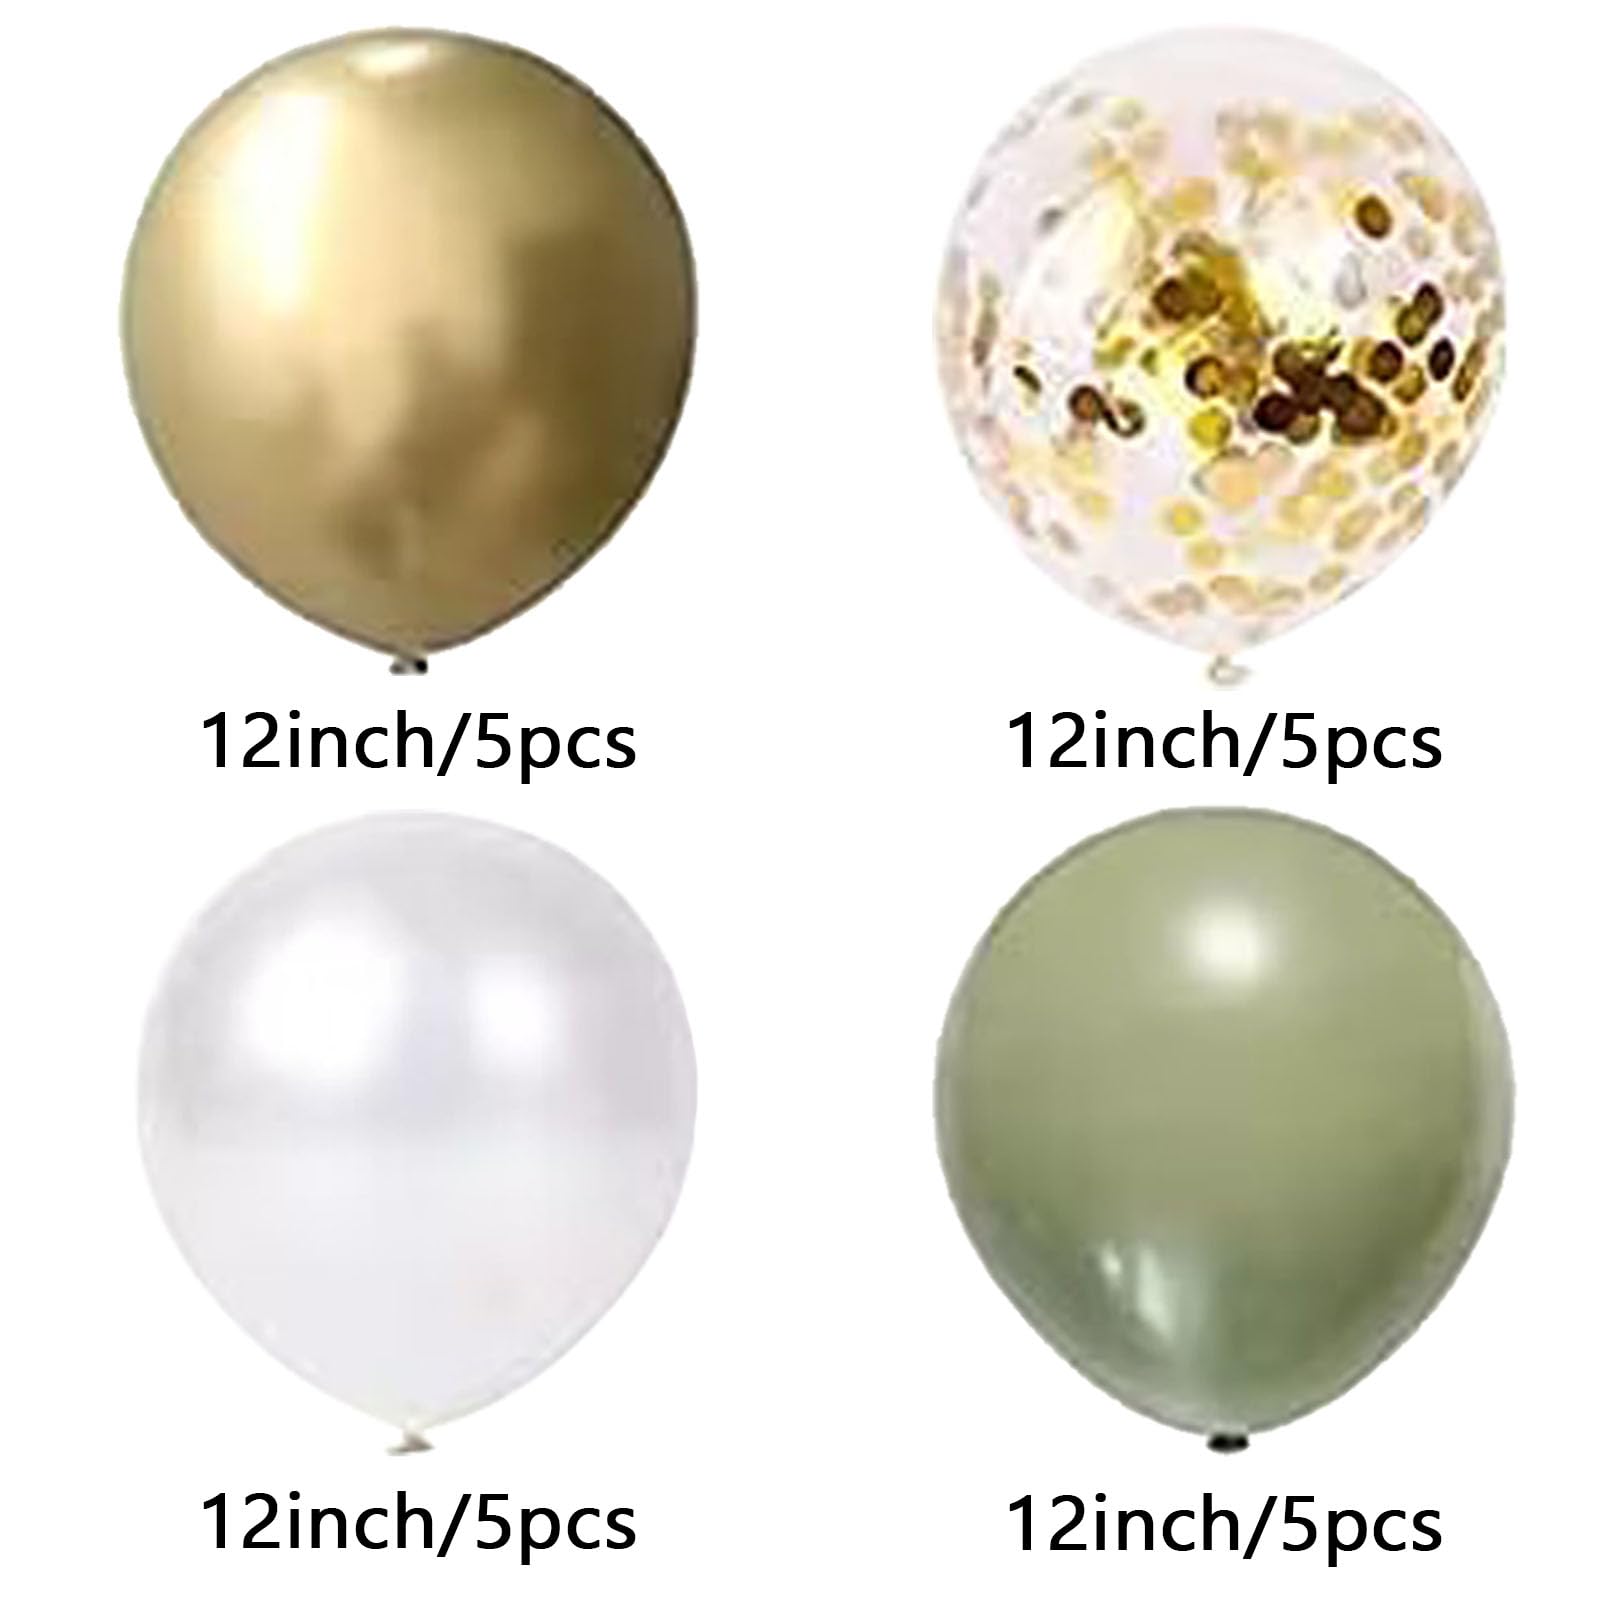 20Pcs 12 Inches Sage Green Gold and White Balloons, 5 x Metallic Gold Balloons, 5 x Sage Green Balloons, 5 x White Balloons, 5 x Gold Confetti Balloons